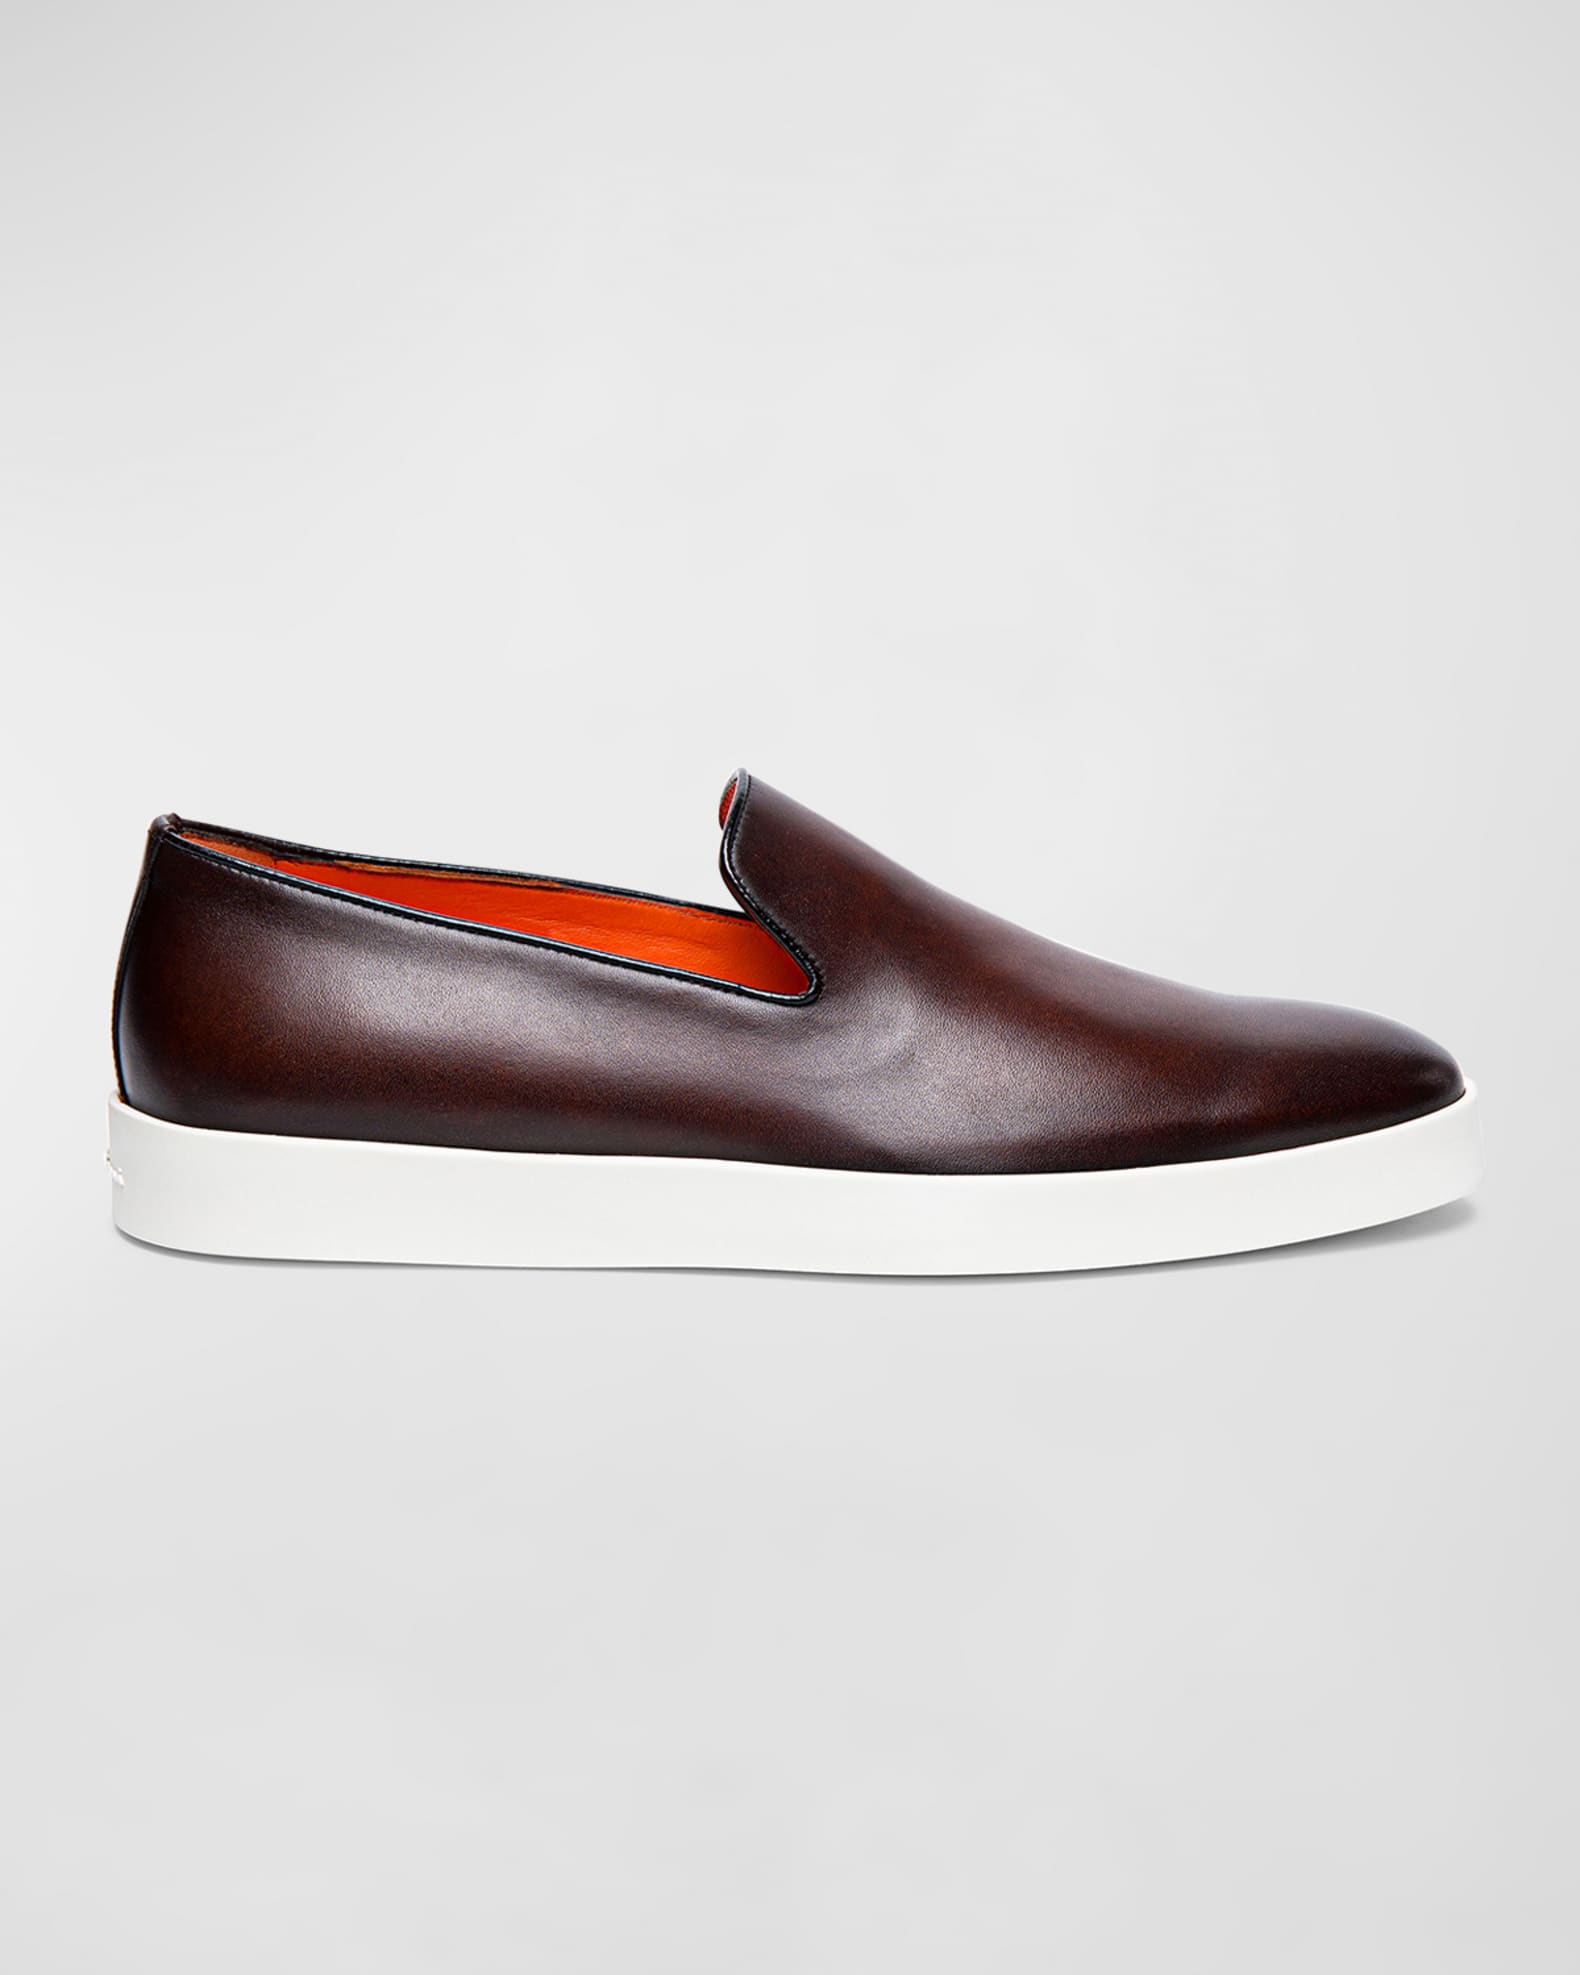 LV Gloria Loafers  Flat loafers outfit, Loafer outfit, Loafers